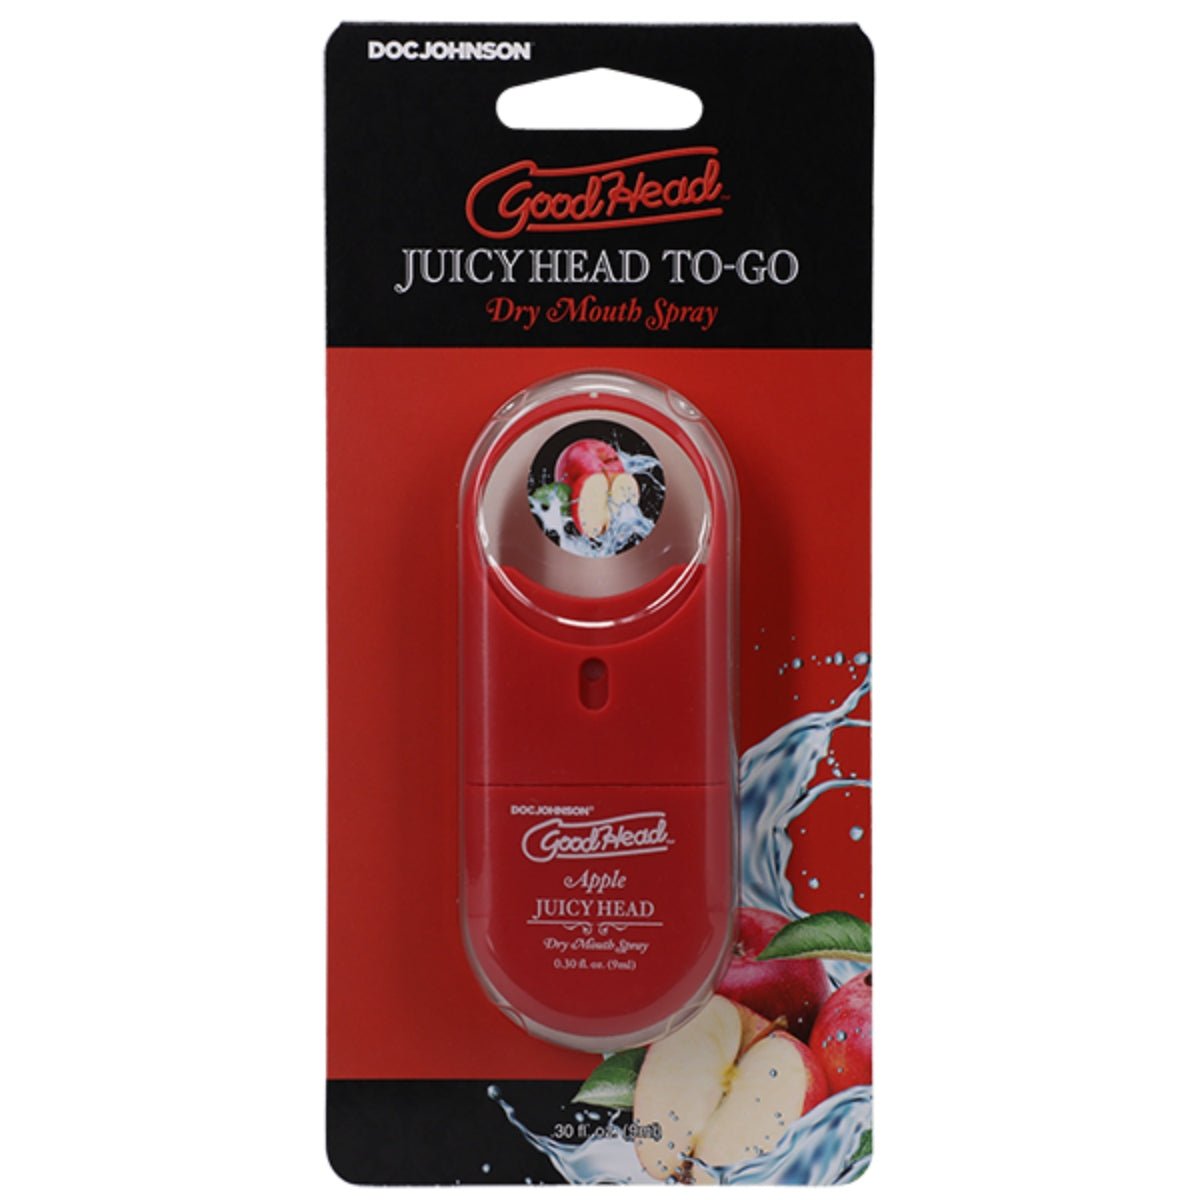 Flavoured Lube Goodhead Juicy Head Dry Mouth Spray To-Go Apple Flavoured 30 fl.oz   